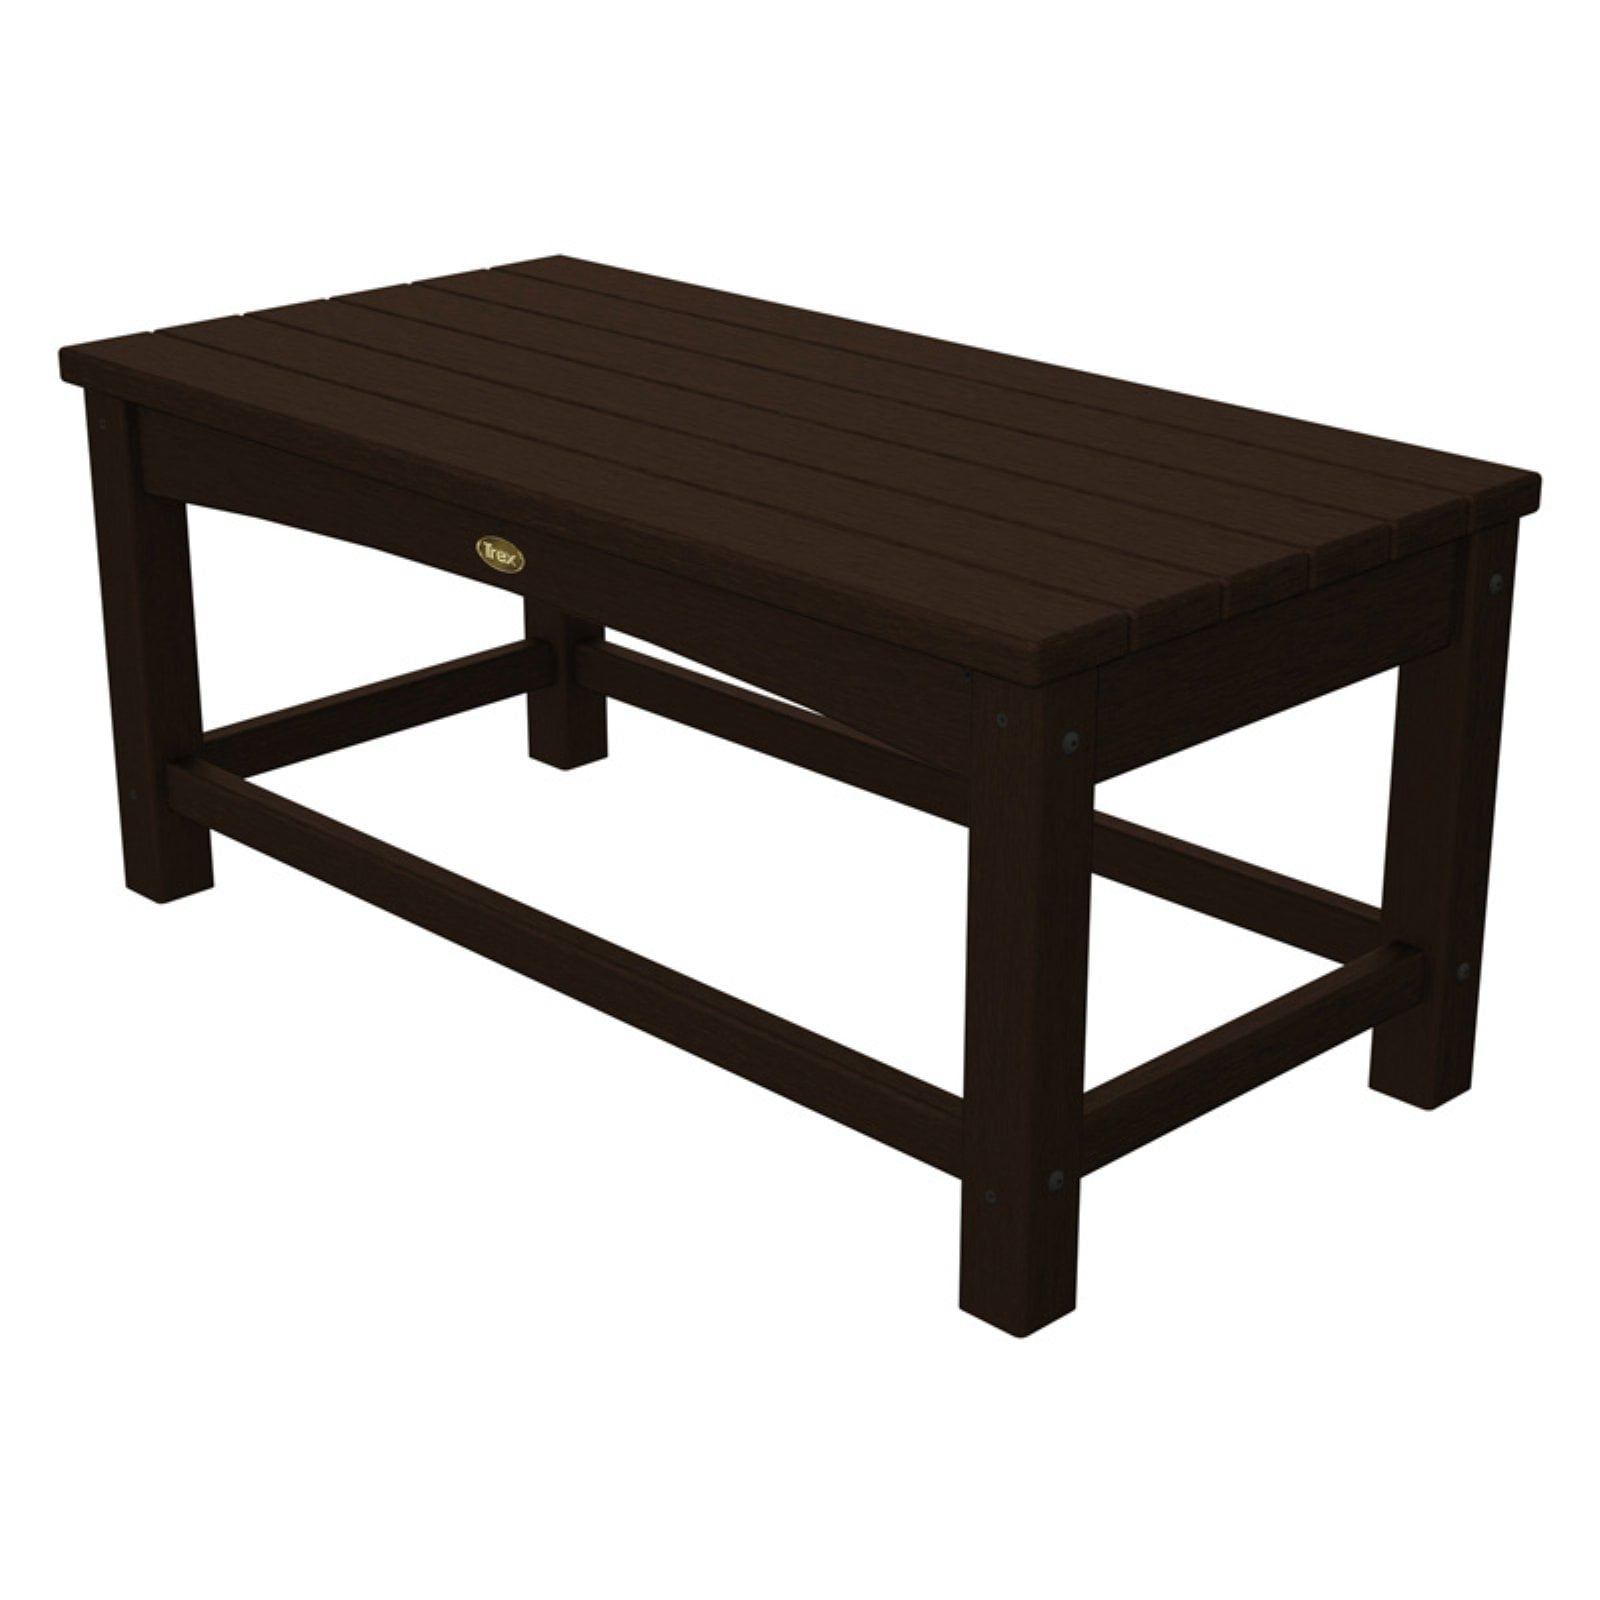 Trex Outdoor Furniture Recycled Plastic Rockport Club Coffee Table